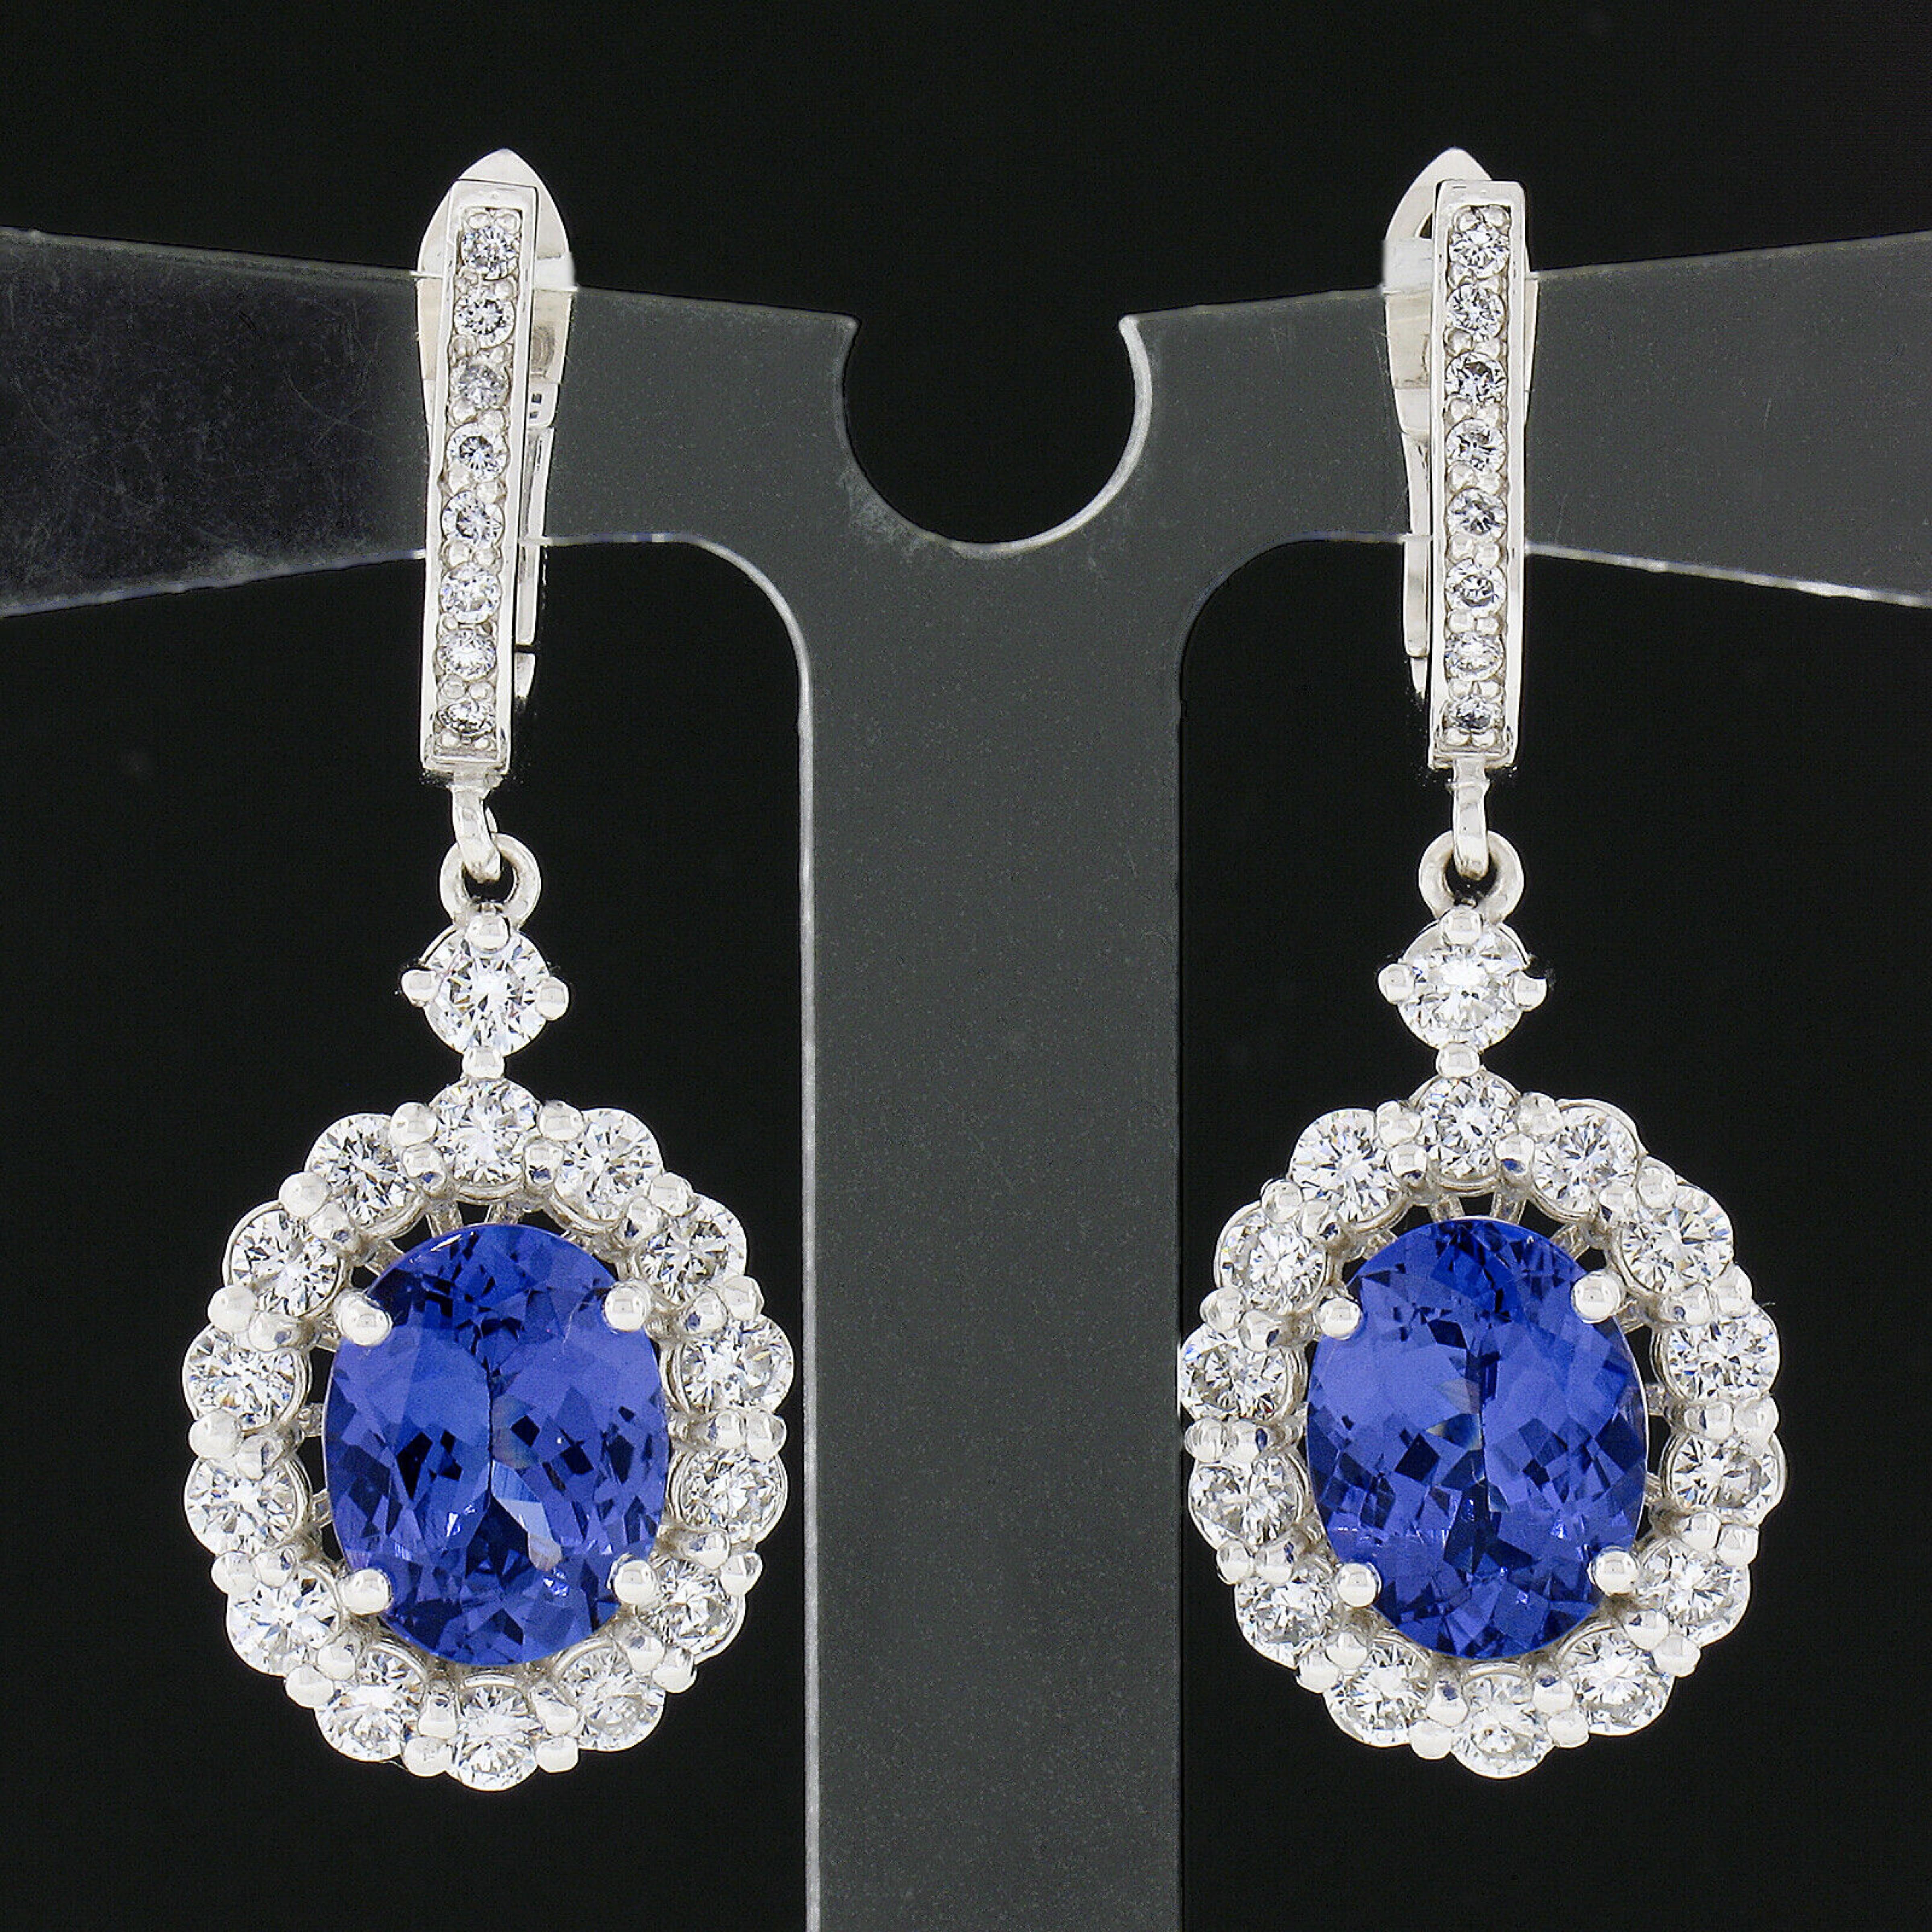 These gorgeous, custom designed, earrings are newly crafted from solid 14k white gold and feature a drop dangle style that carries a stunning tanzanite with fine quality, round brilliant cut, diamonds throughout. The top of the earrings are neatly